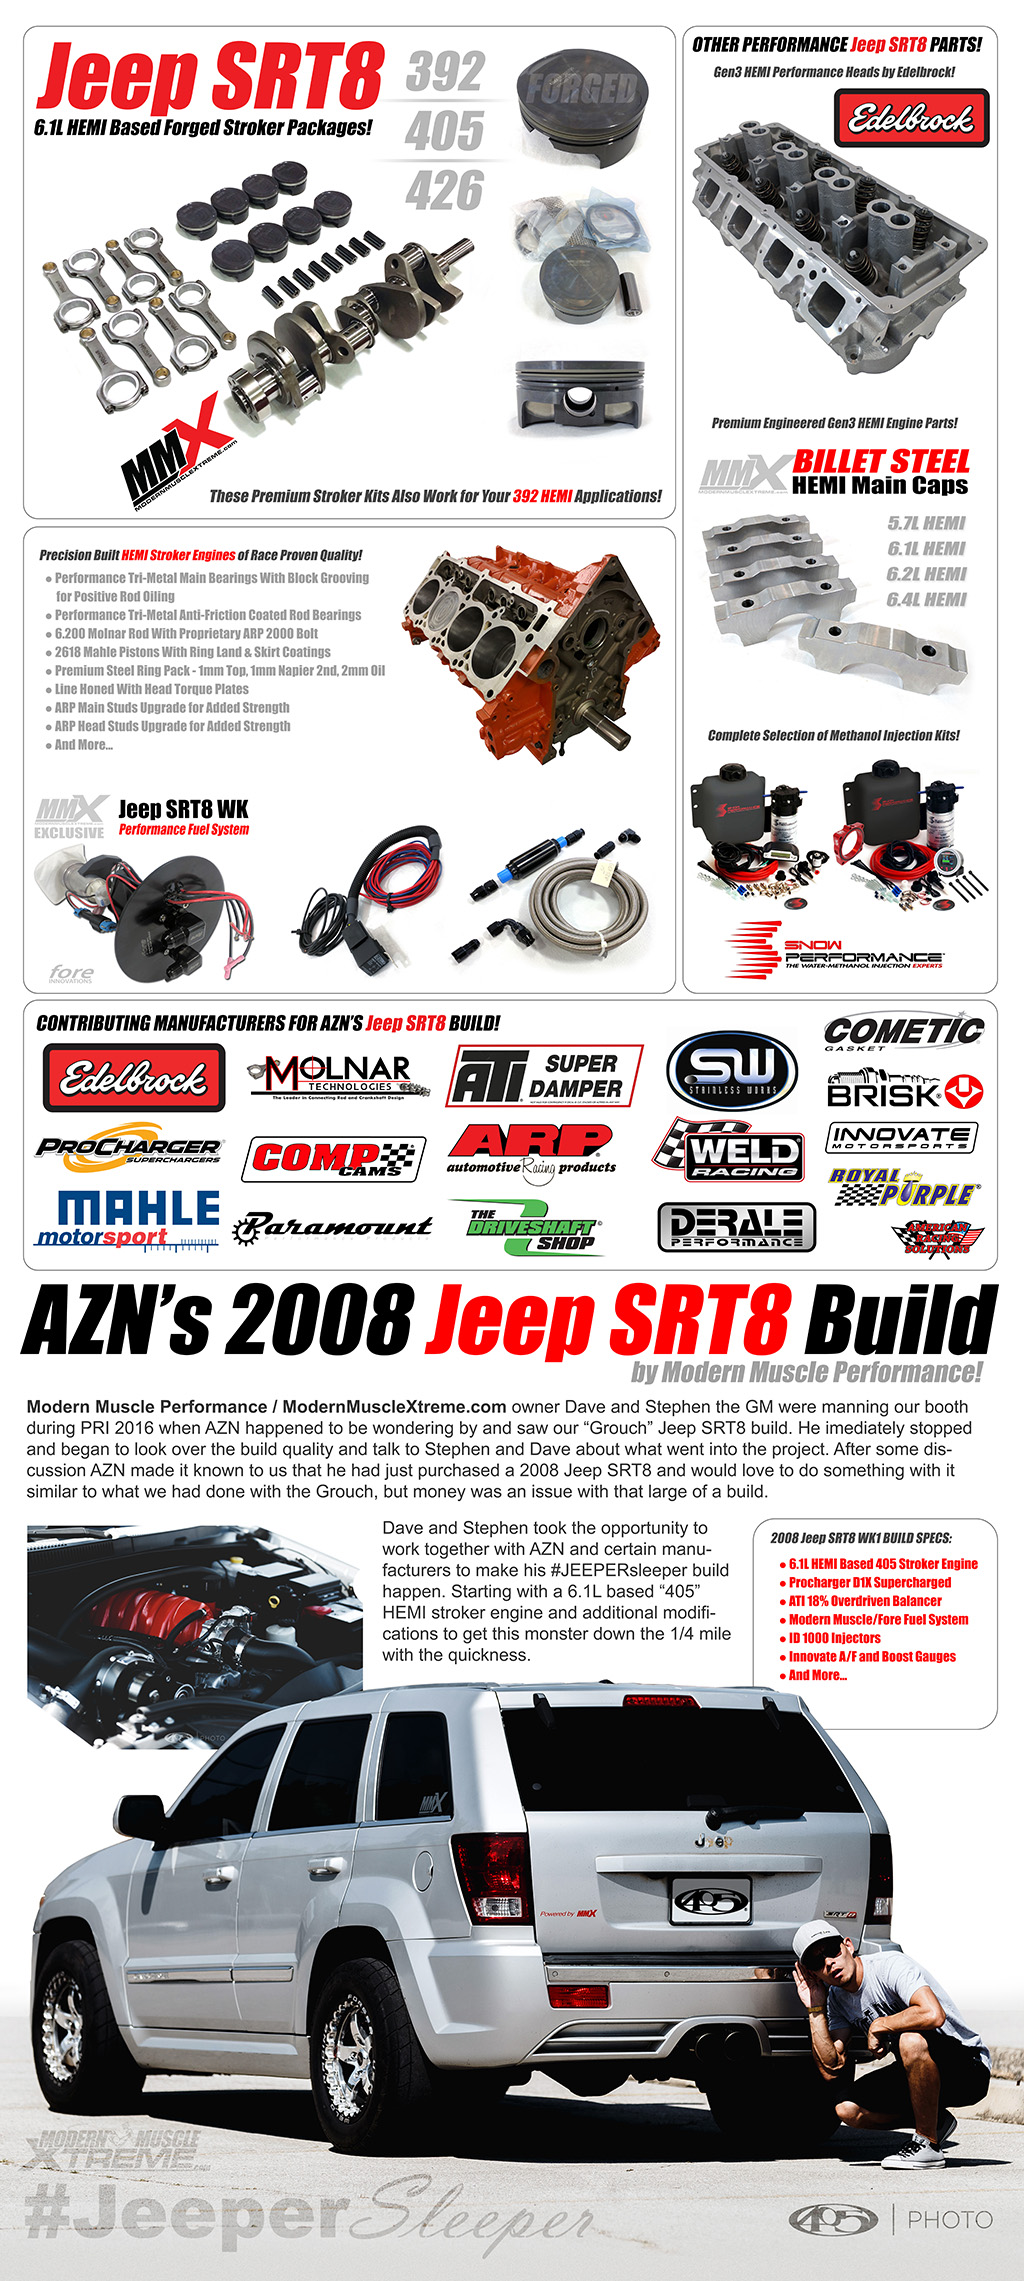 AZN's 2008 Jeep SRT8 Build by Modern Muscle Performance